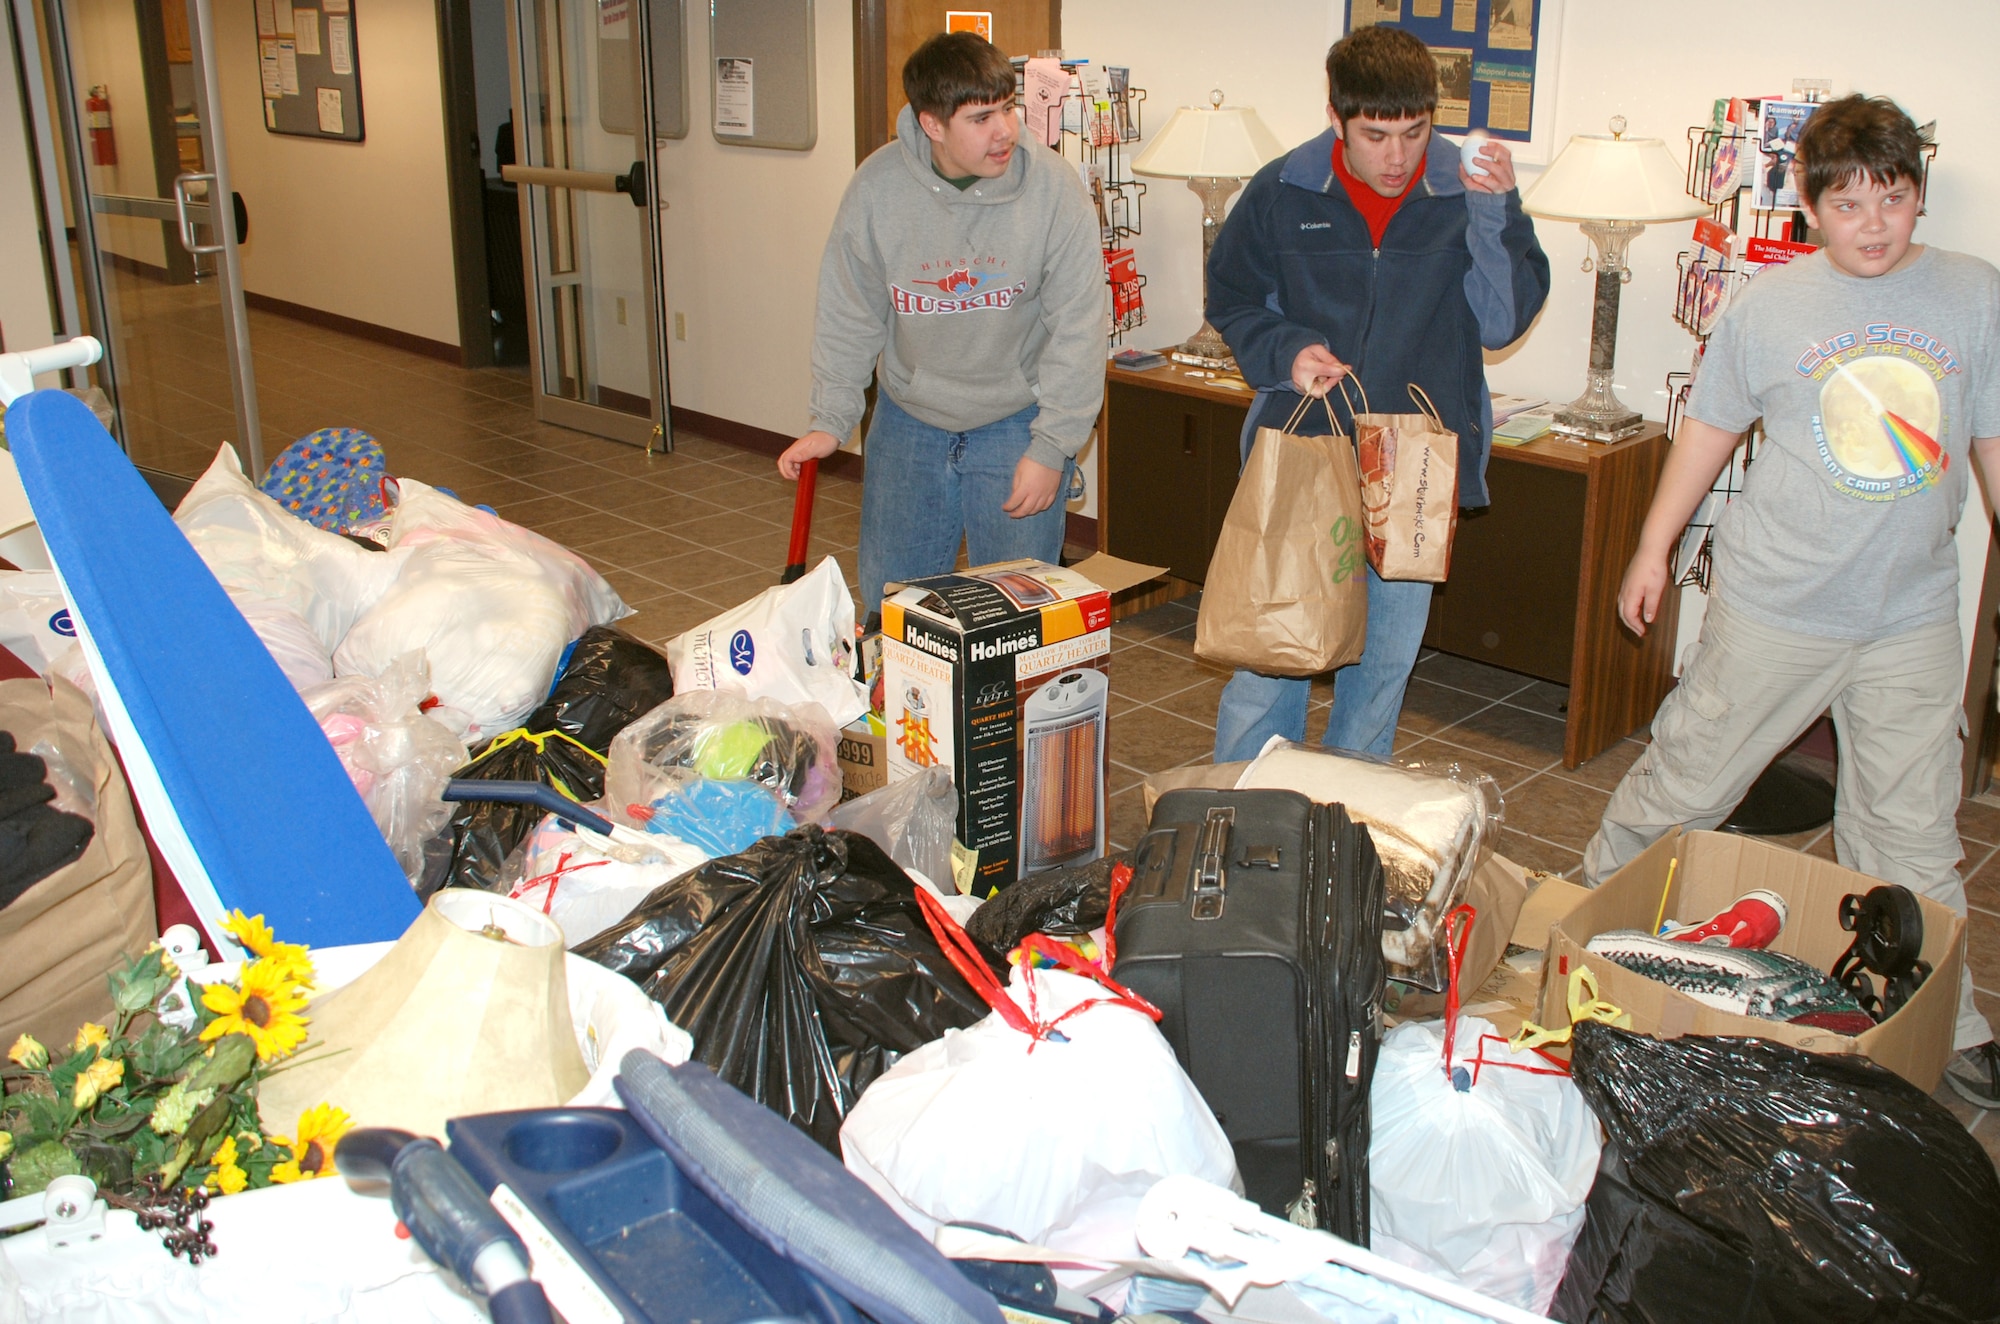 Jared and Andrew Blakeman from Boy Scout Troop 232 and Alex Karabel from Cub Scout Pack 232, sort through some of the donated items gathered Feb. 24 during their Airman's Attic collection drive. The donations filled the lobby of the Airman and Family Readiness Flight's main lobby. (U.S. Air Force photo/Tech. Sgt. Jennifer Isom)